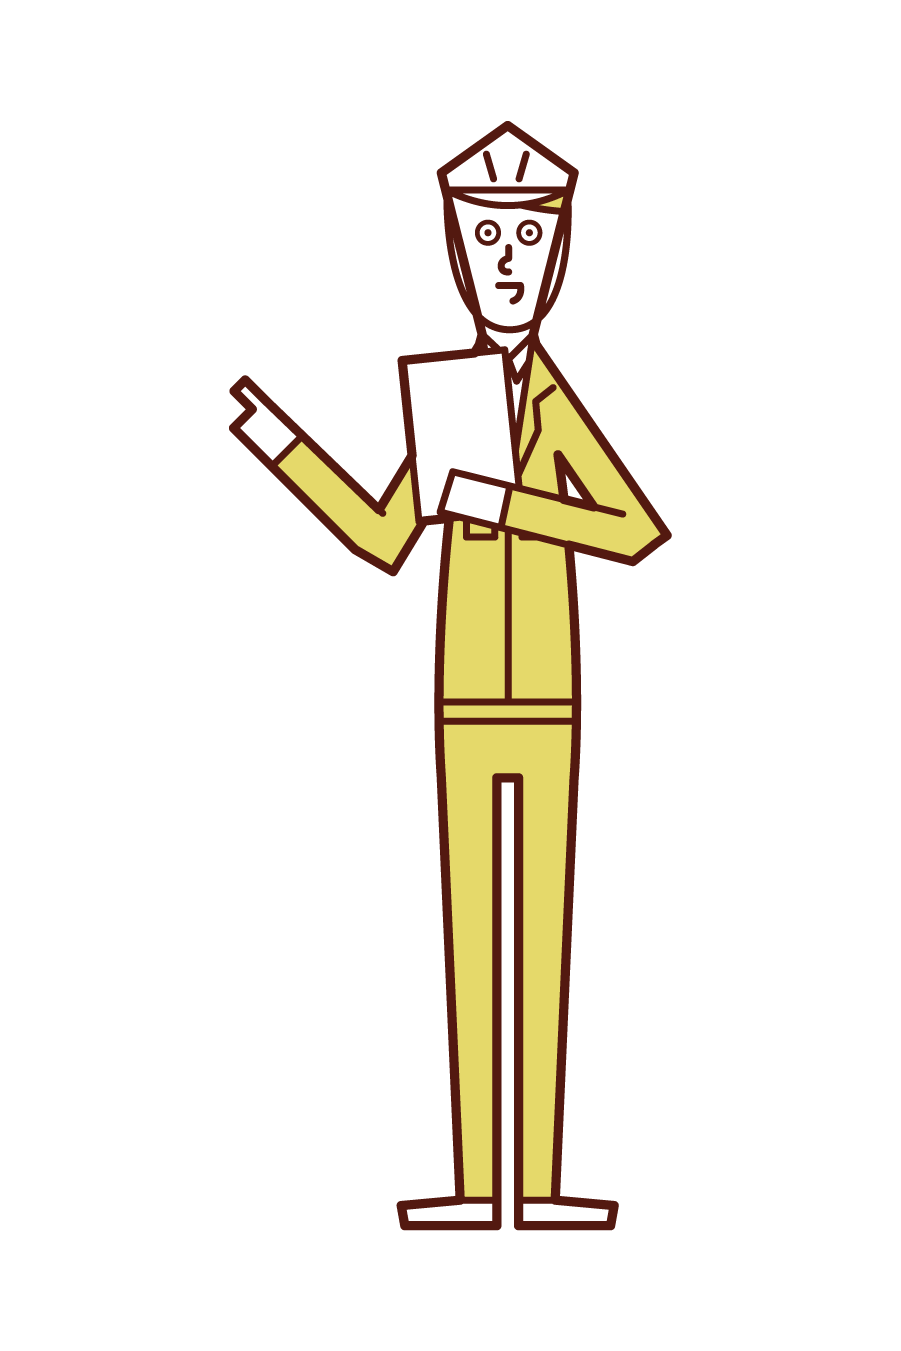 Illustration of a person (man) who confirms safety and calls